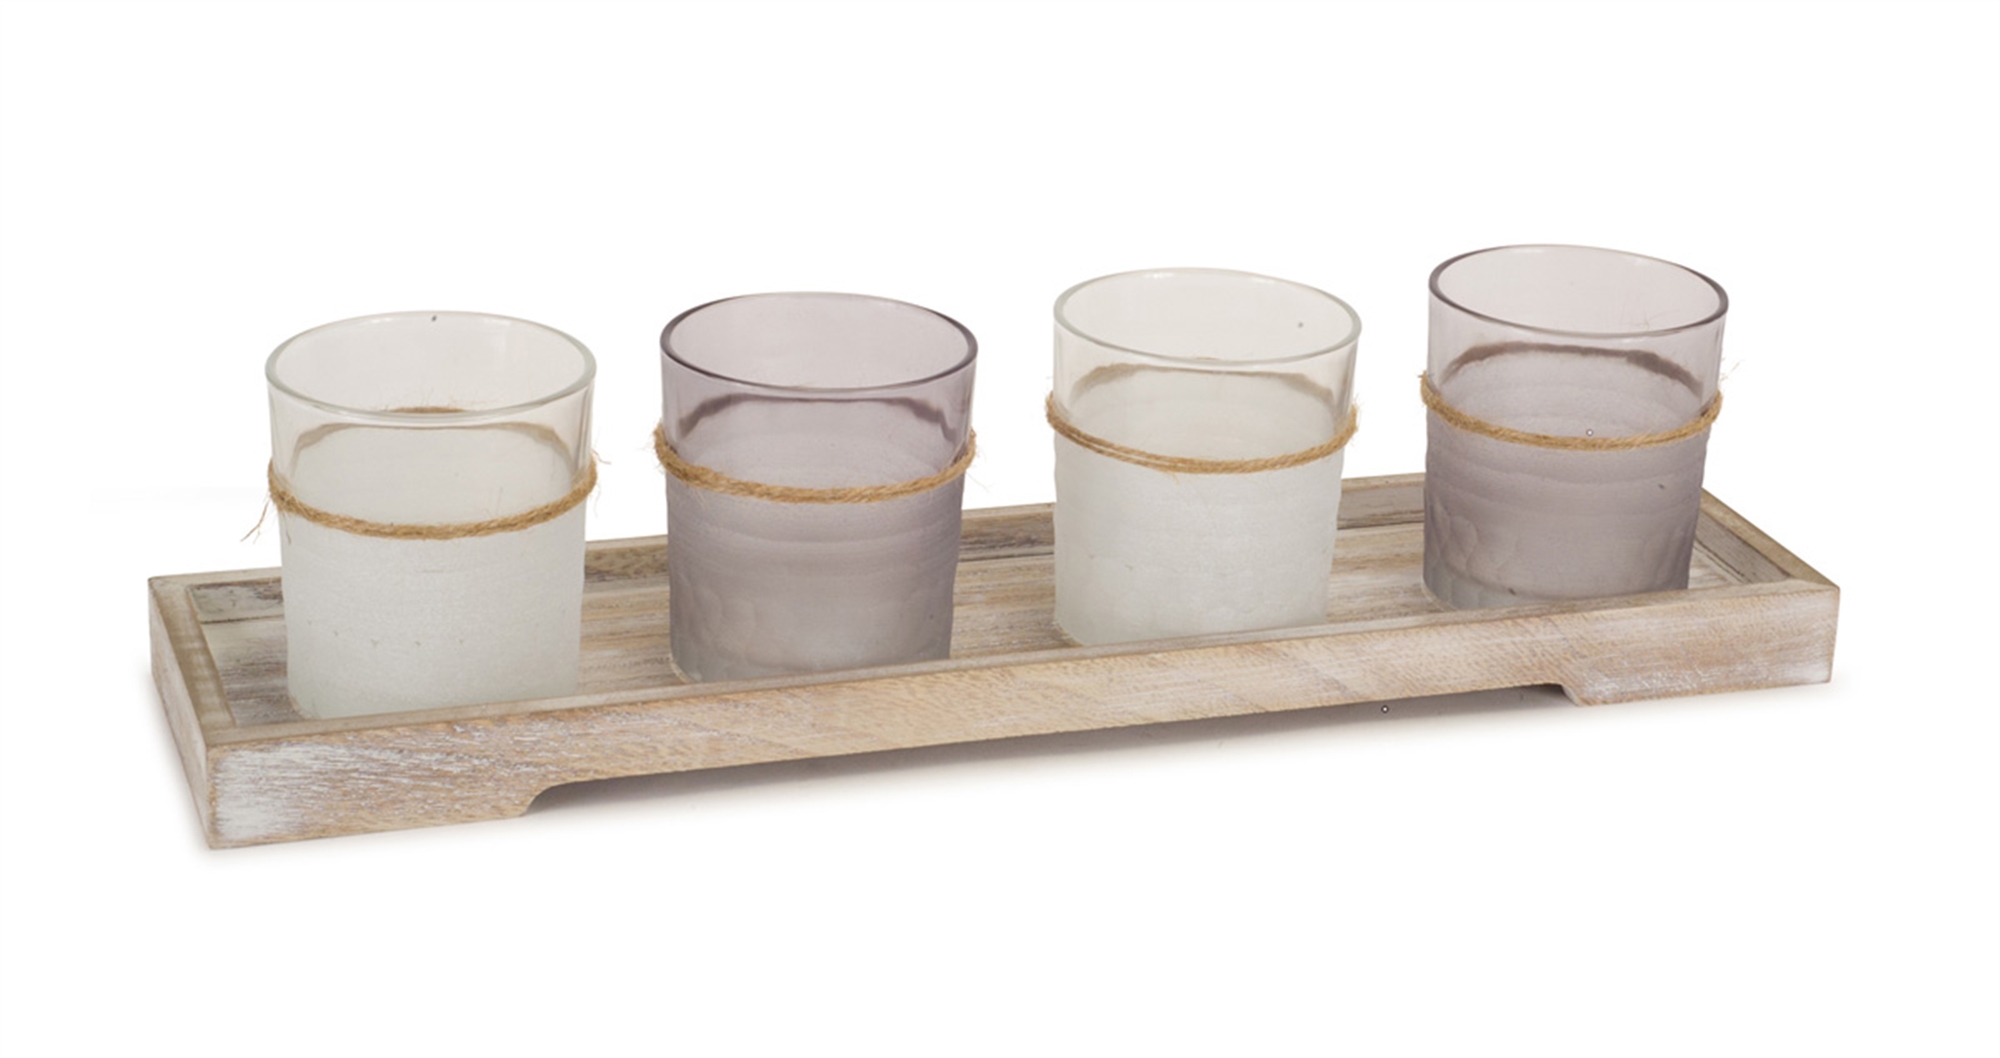 Candle Garden (Set of 2 ) 3.25"H Glass, includes Tray 15"L Wood